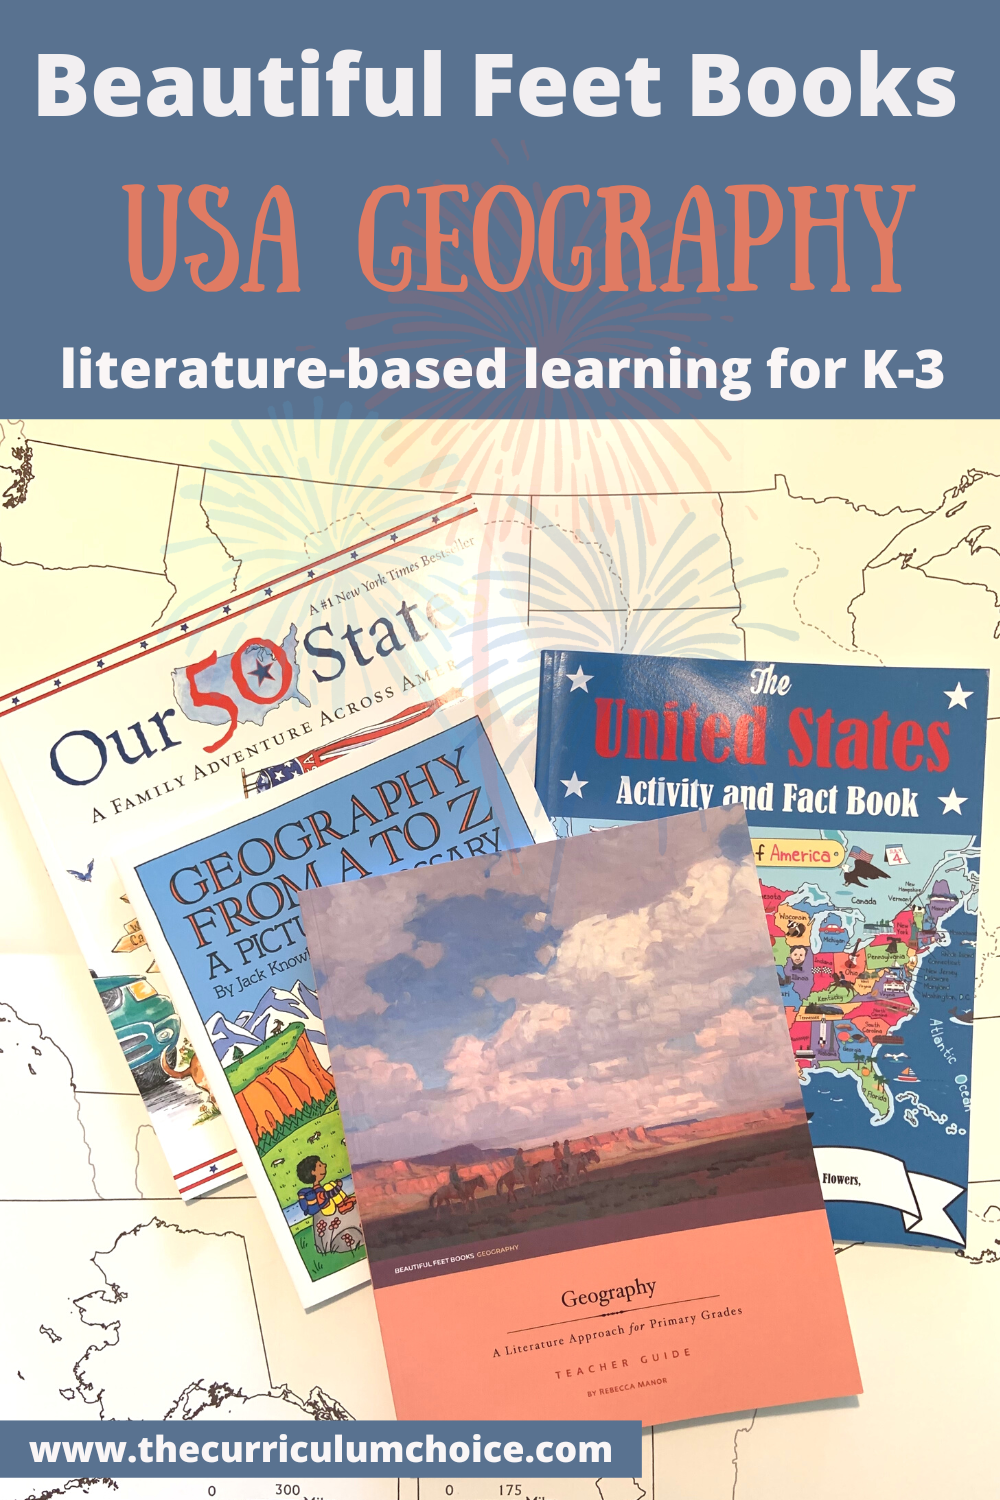 Introducing Homeschool Geography for K-3